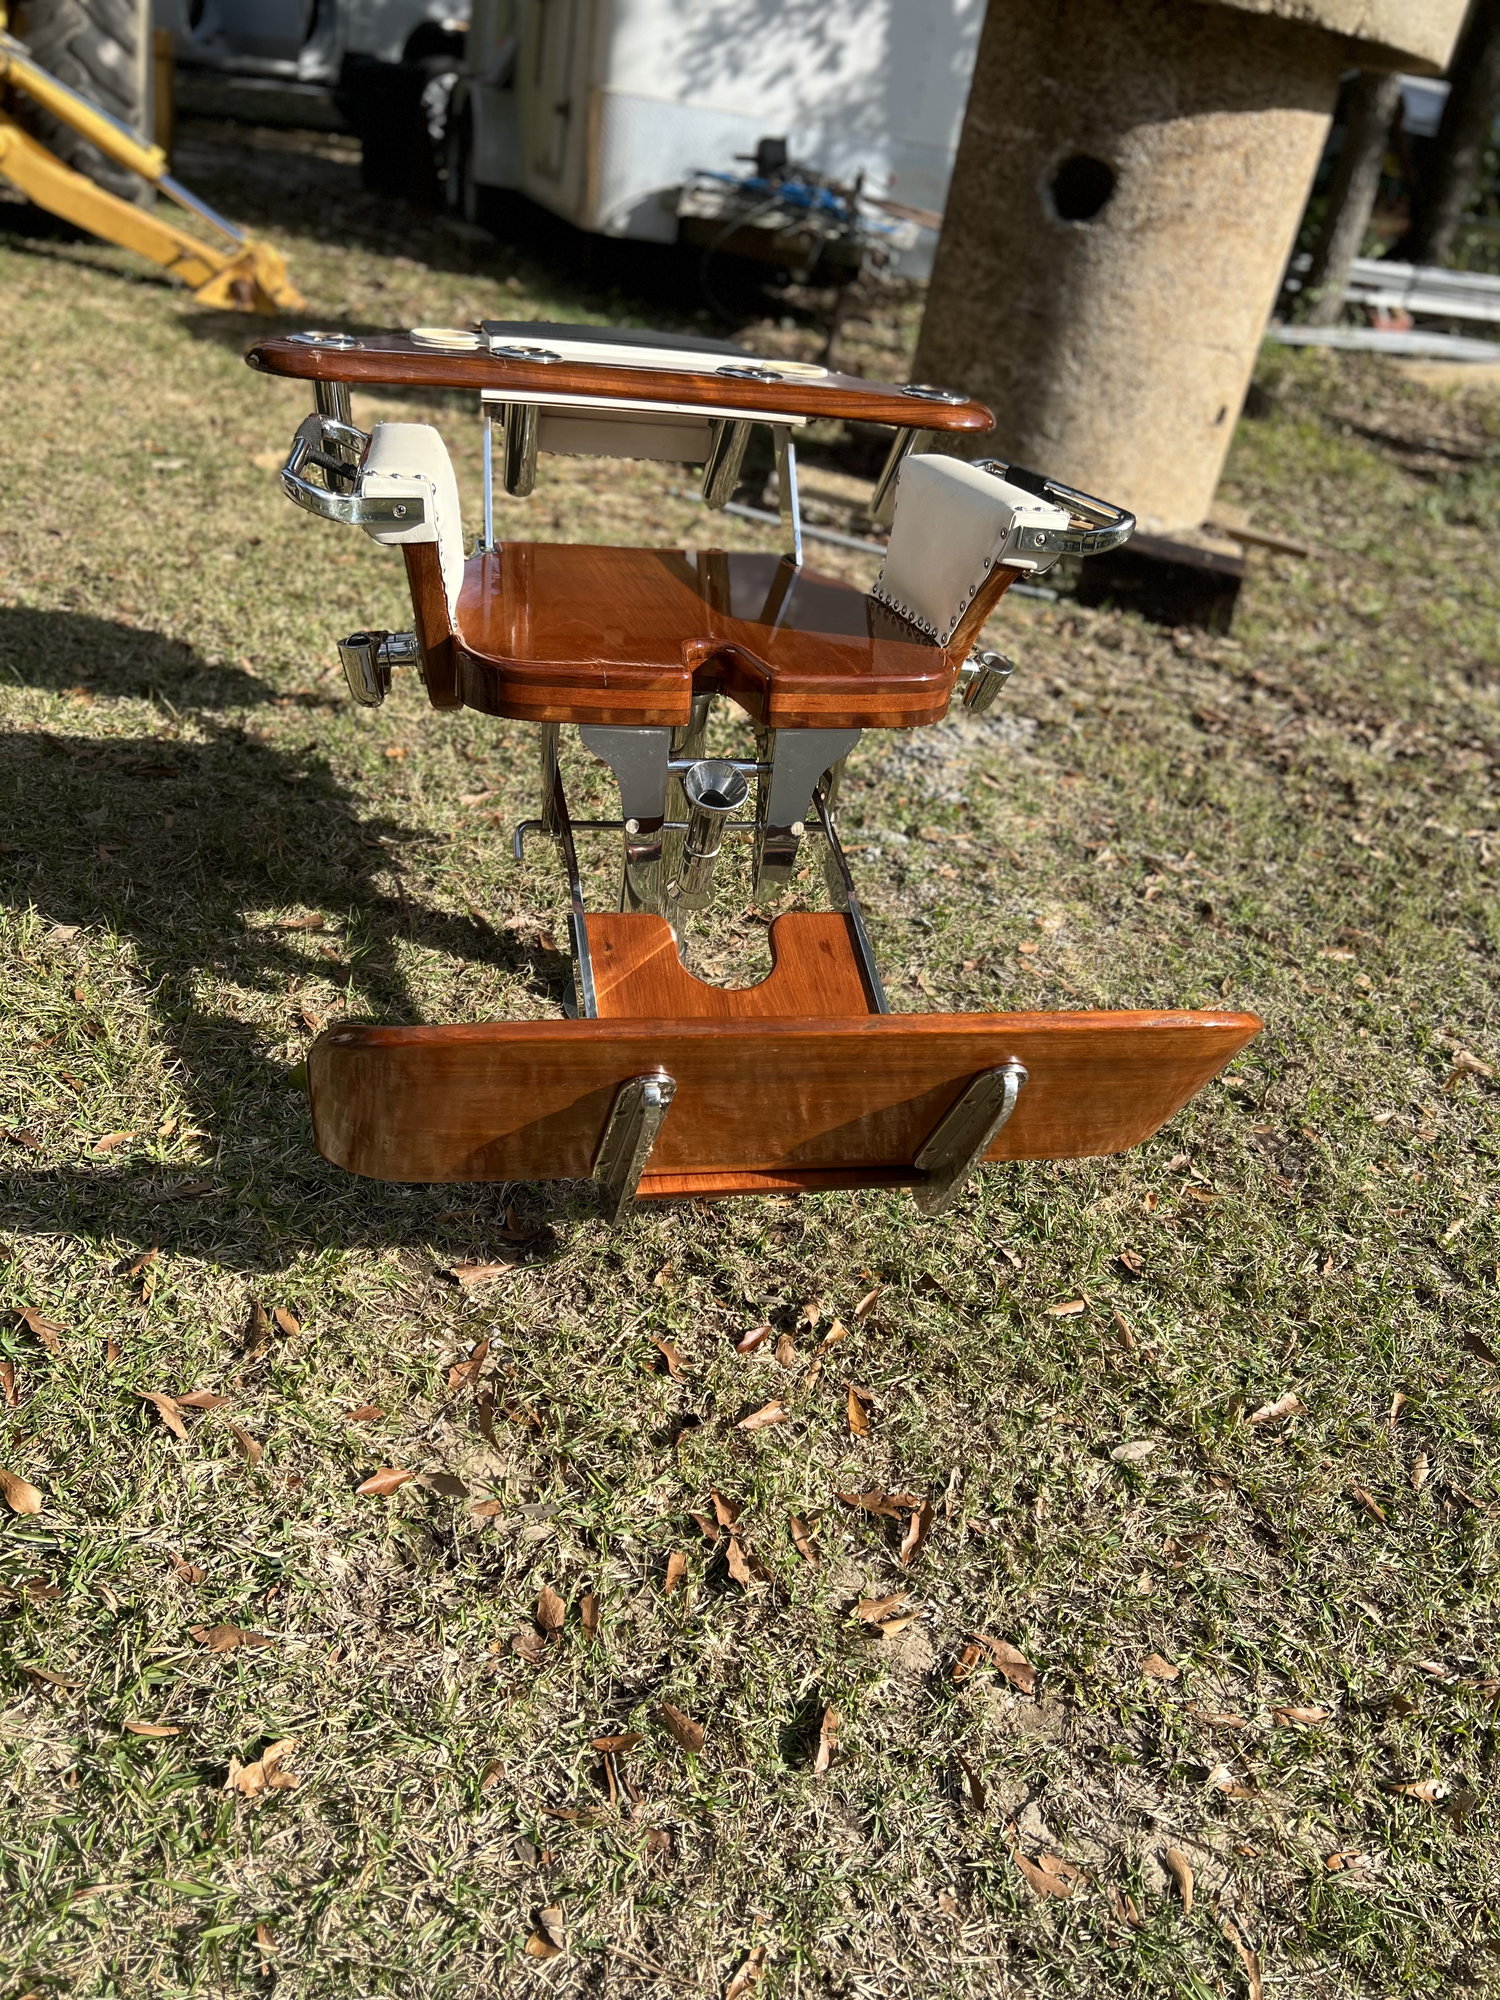 Rybovich Fighting Chair 130lbs Class Teak and Stainless - The Hull Truth -  Boating and Fishing Forum